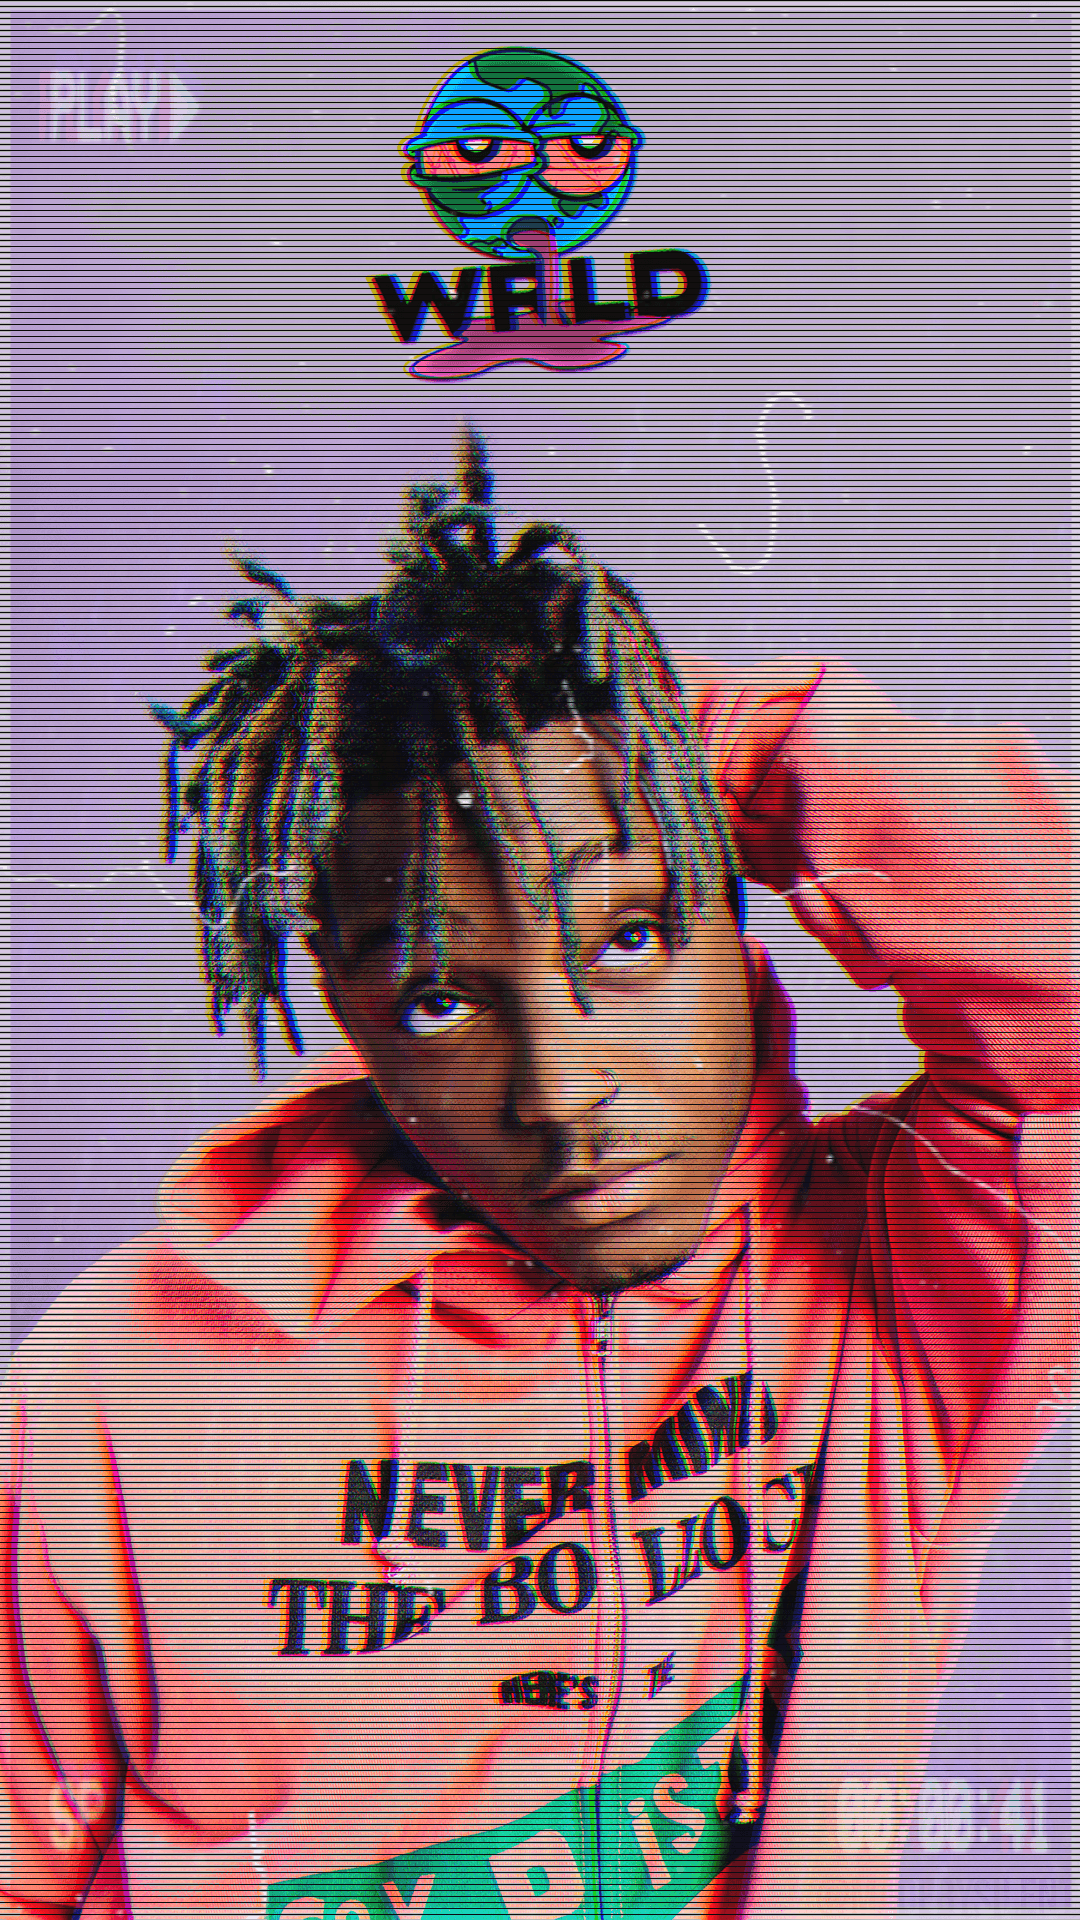 Juice WRLD wallpaper by GabeGraphicDesign - Download on ZEDGE™